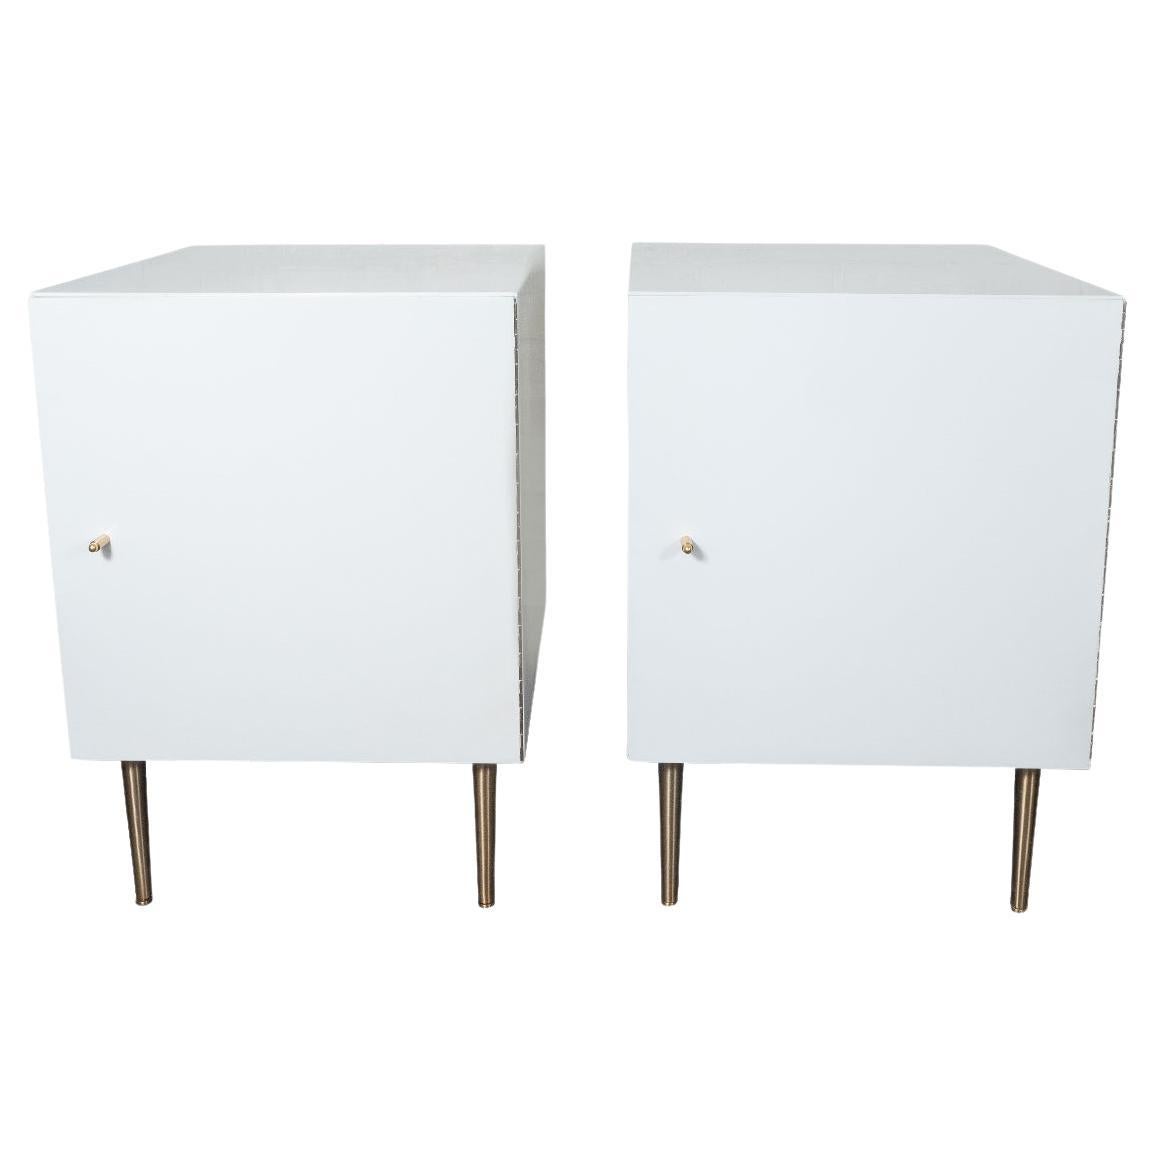 Pair of Mid-Century Modern Cubic White Cabinets For Sale